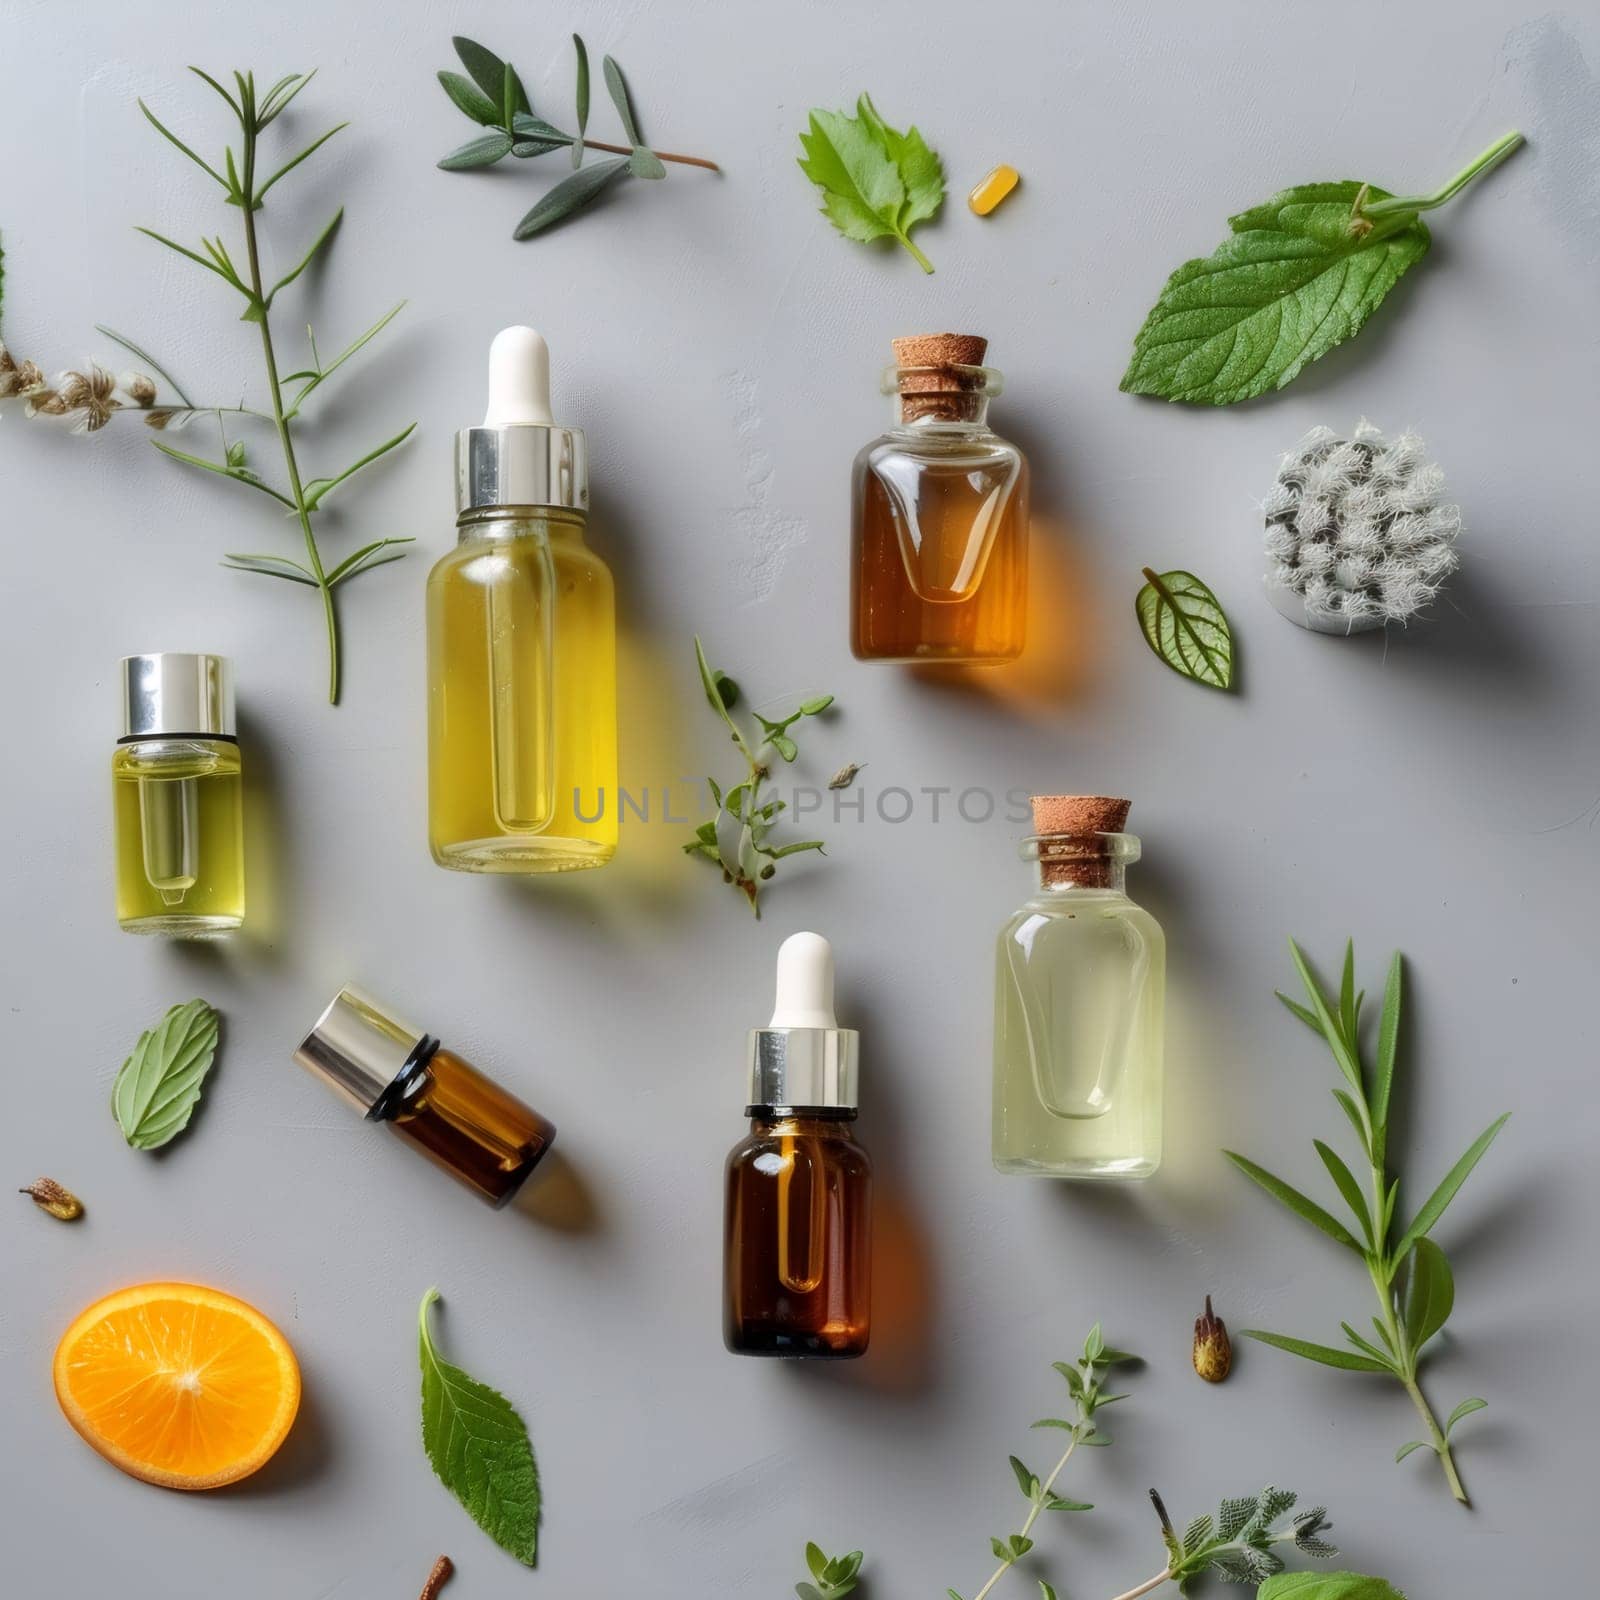 Six glass jars with aromatic oils, medicinal flowers, a slice of orange and branches of rosemary lie on a gray background, flat lay close-up.